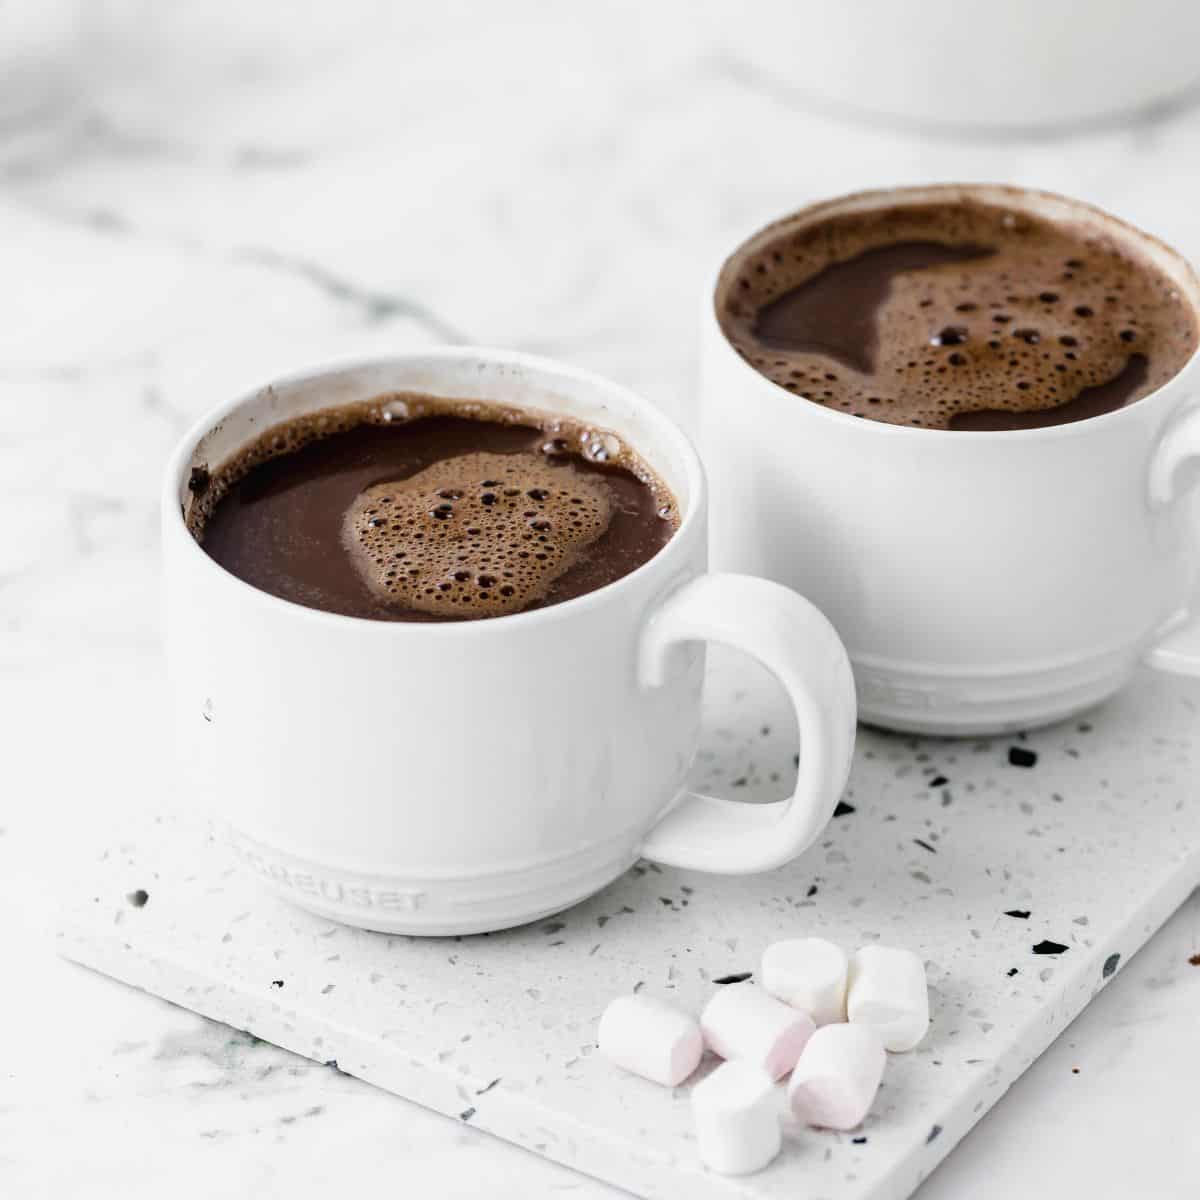 https://homecookedroots.com/wp-content/uploads/2022/11/How-to-Make-Hot-Chocolate-with-Cocoa-Powder.jpg